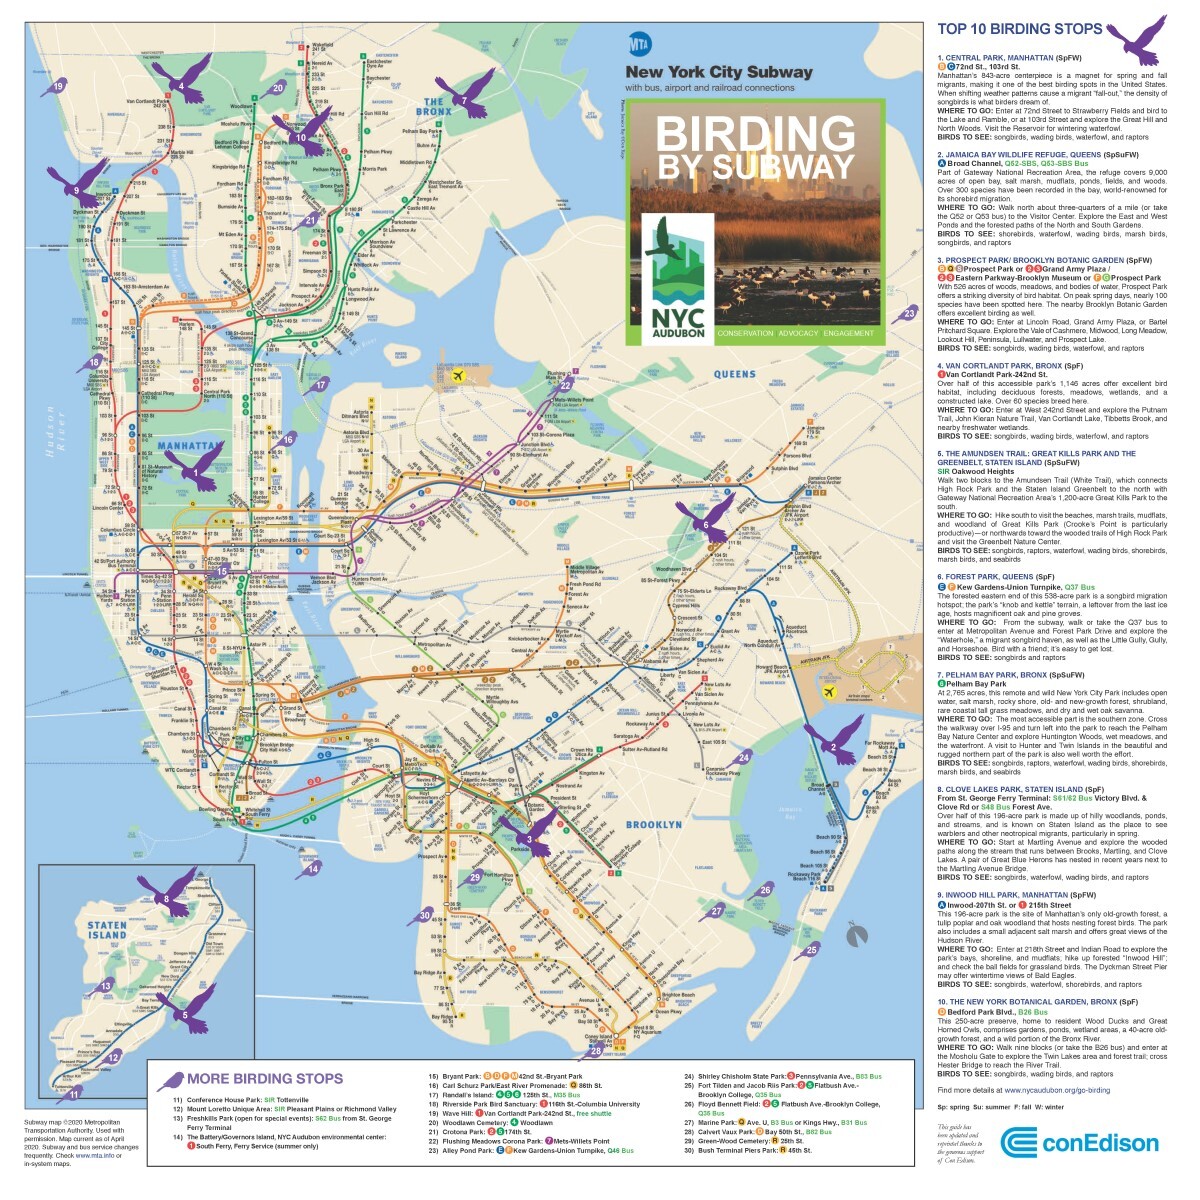 Birding by Subway features accessible hotspots across the City